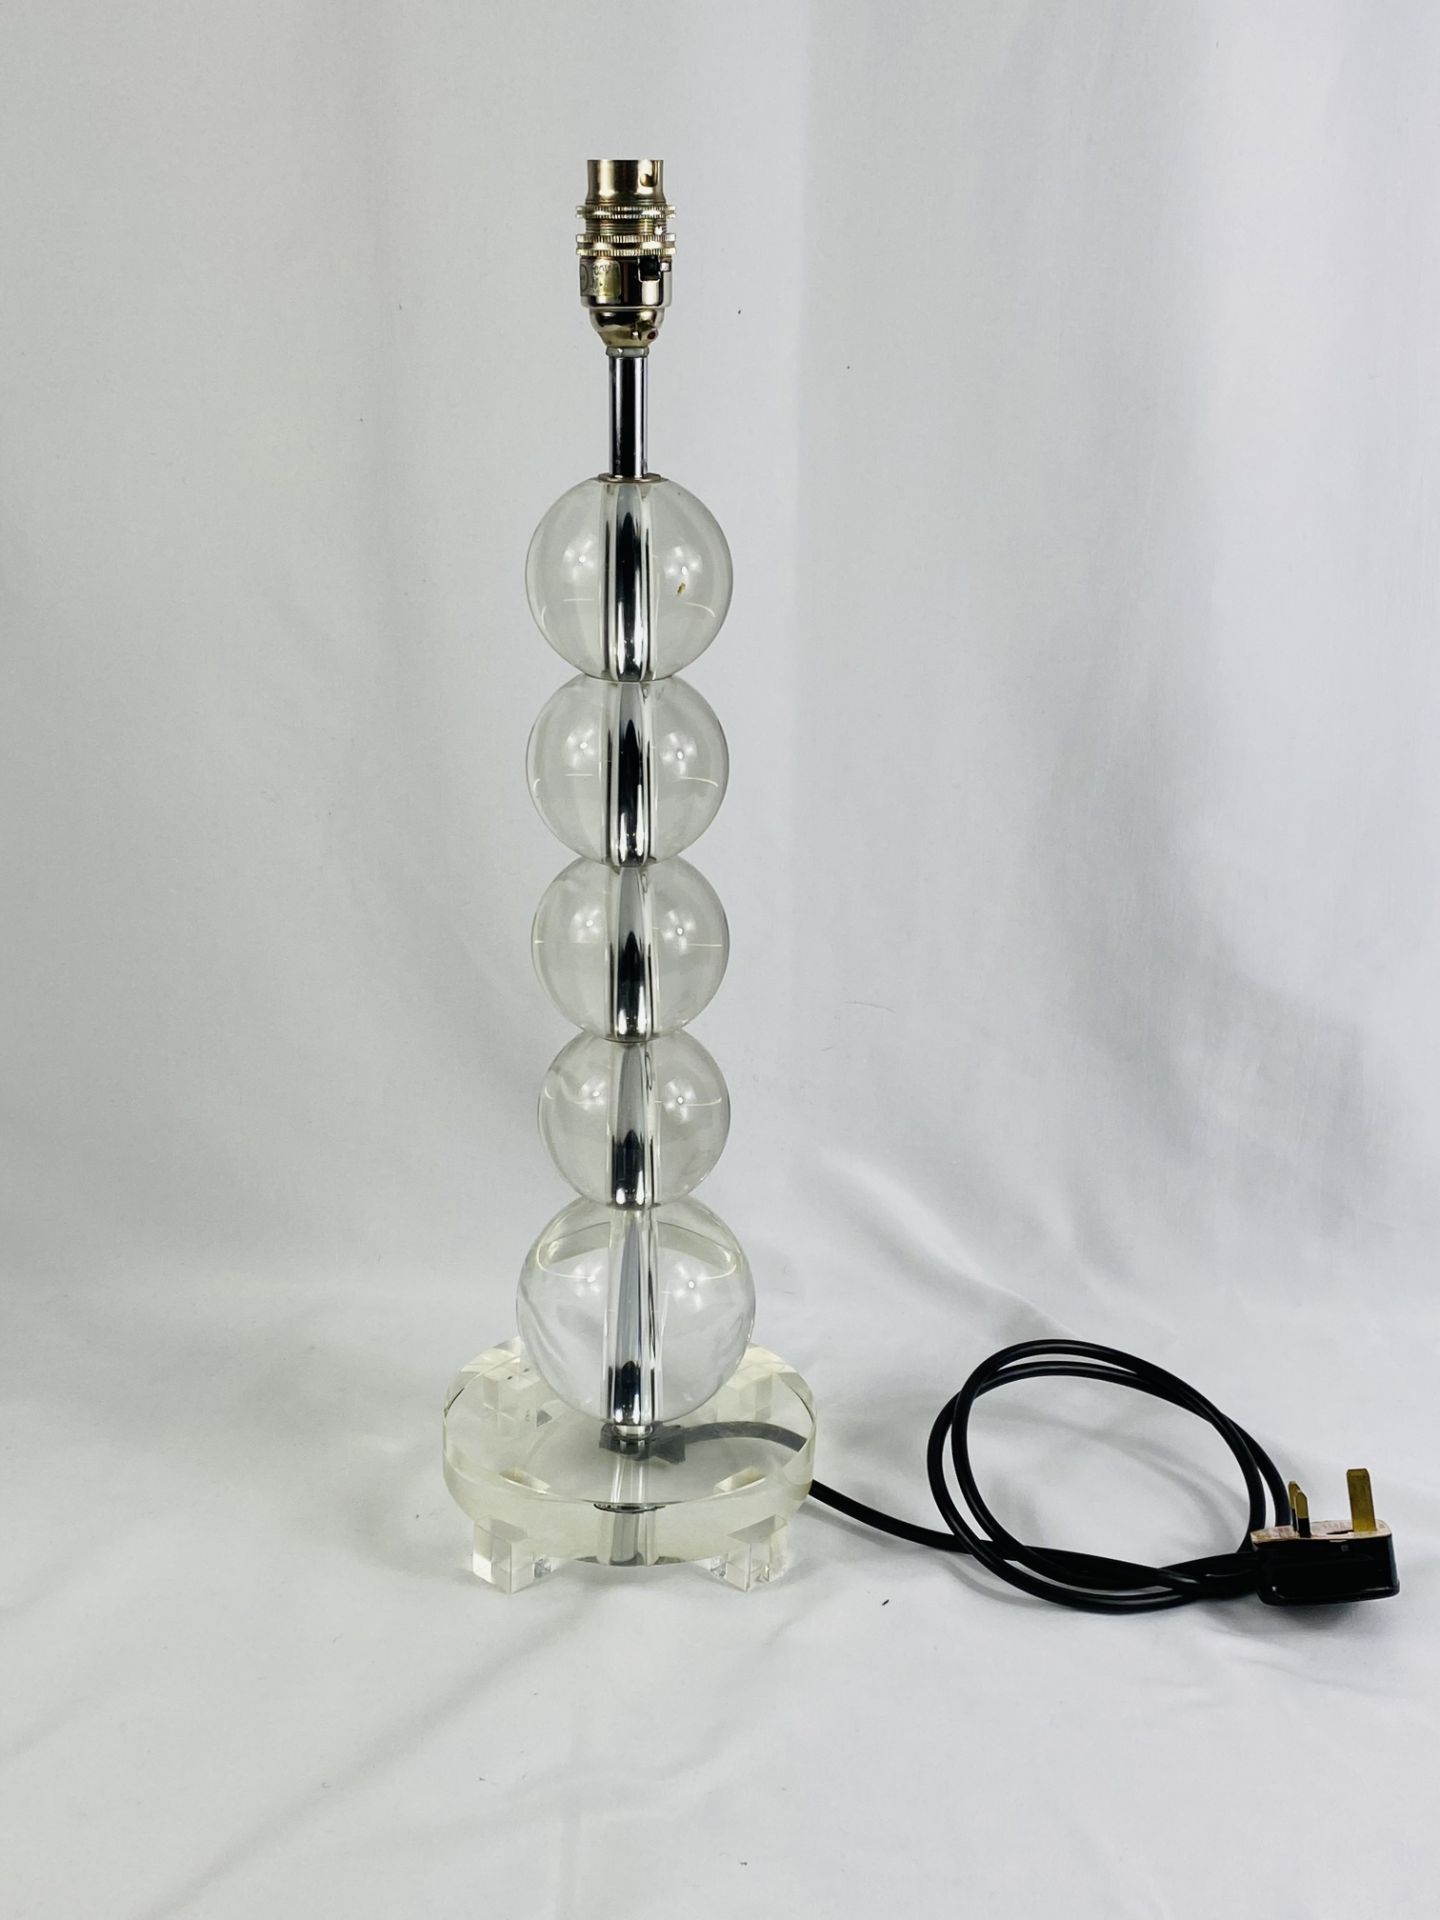 Contemporary glass and chrome table lamp - Image 2 of 4